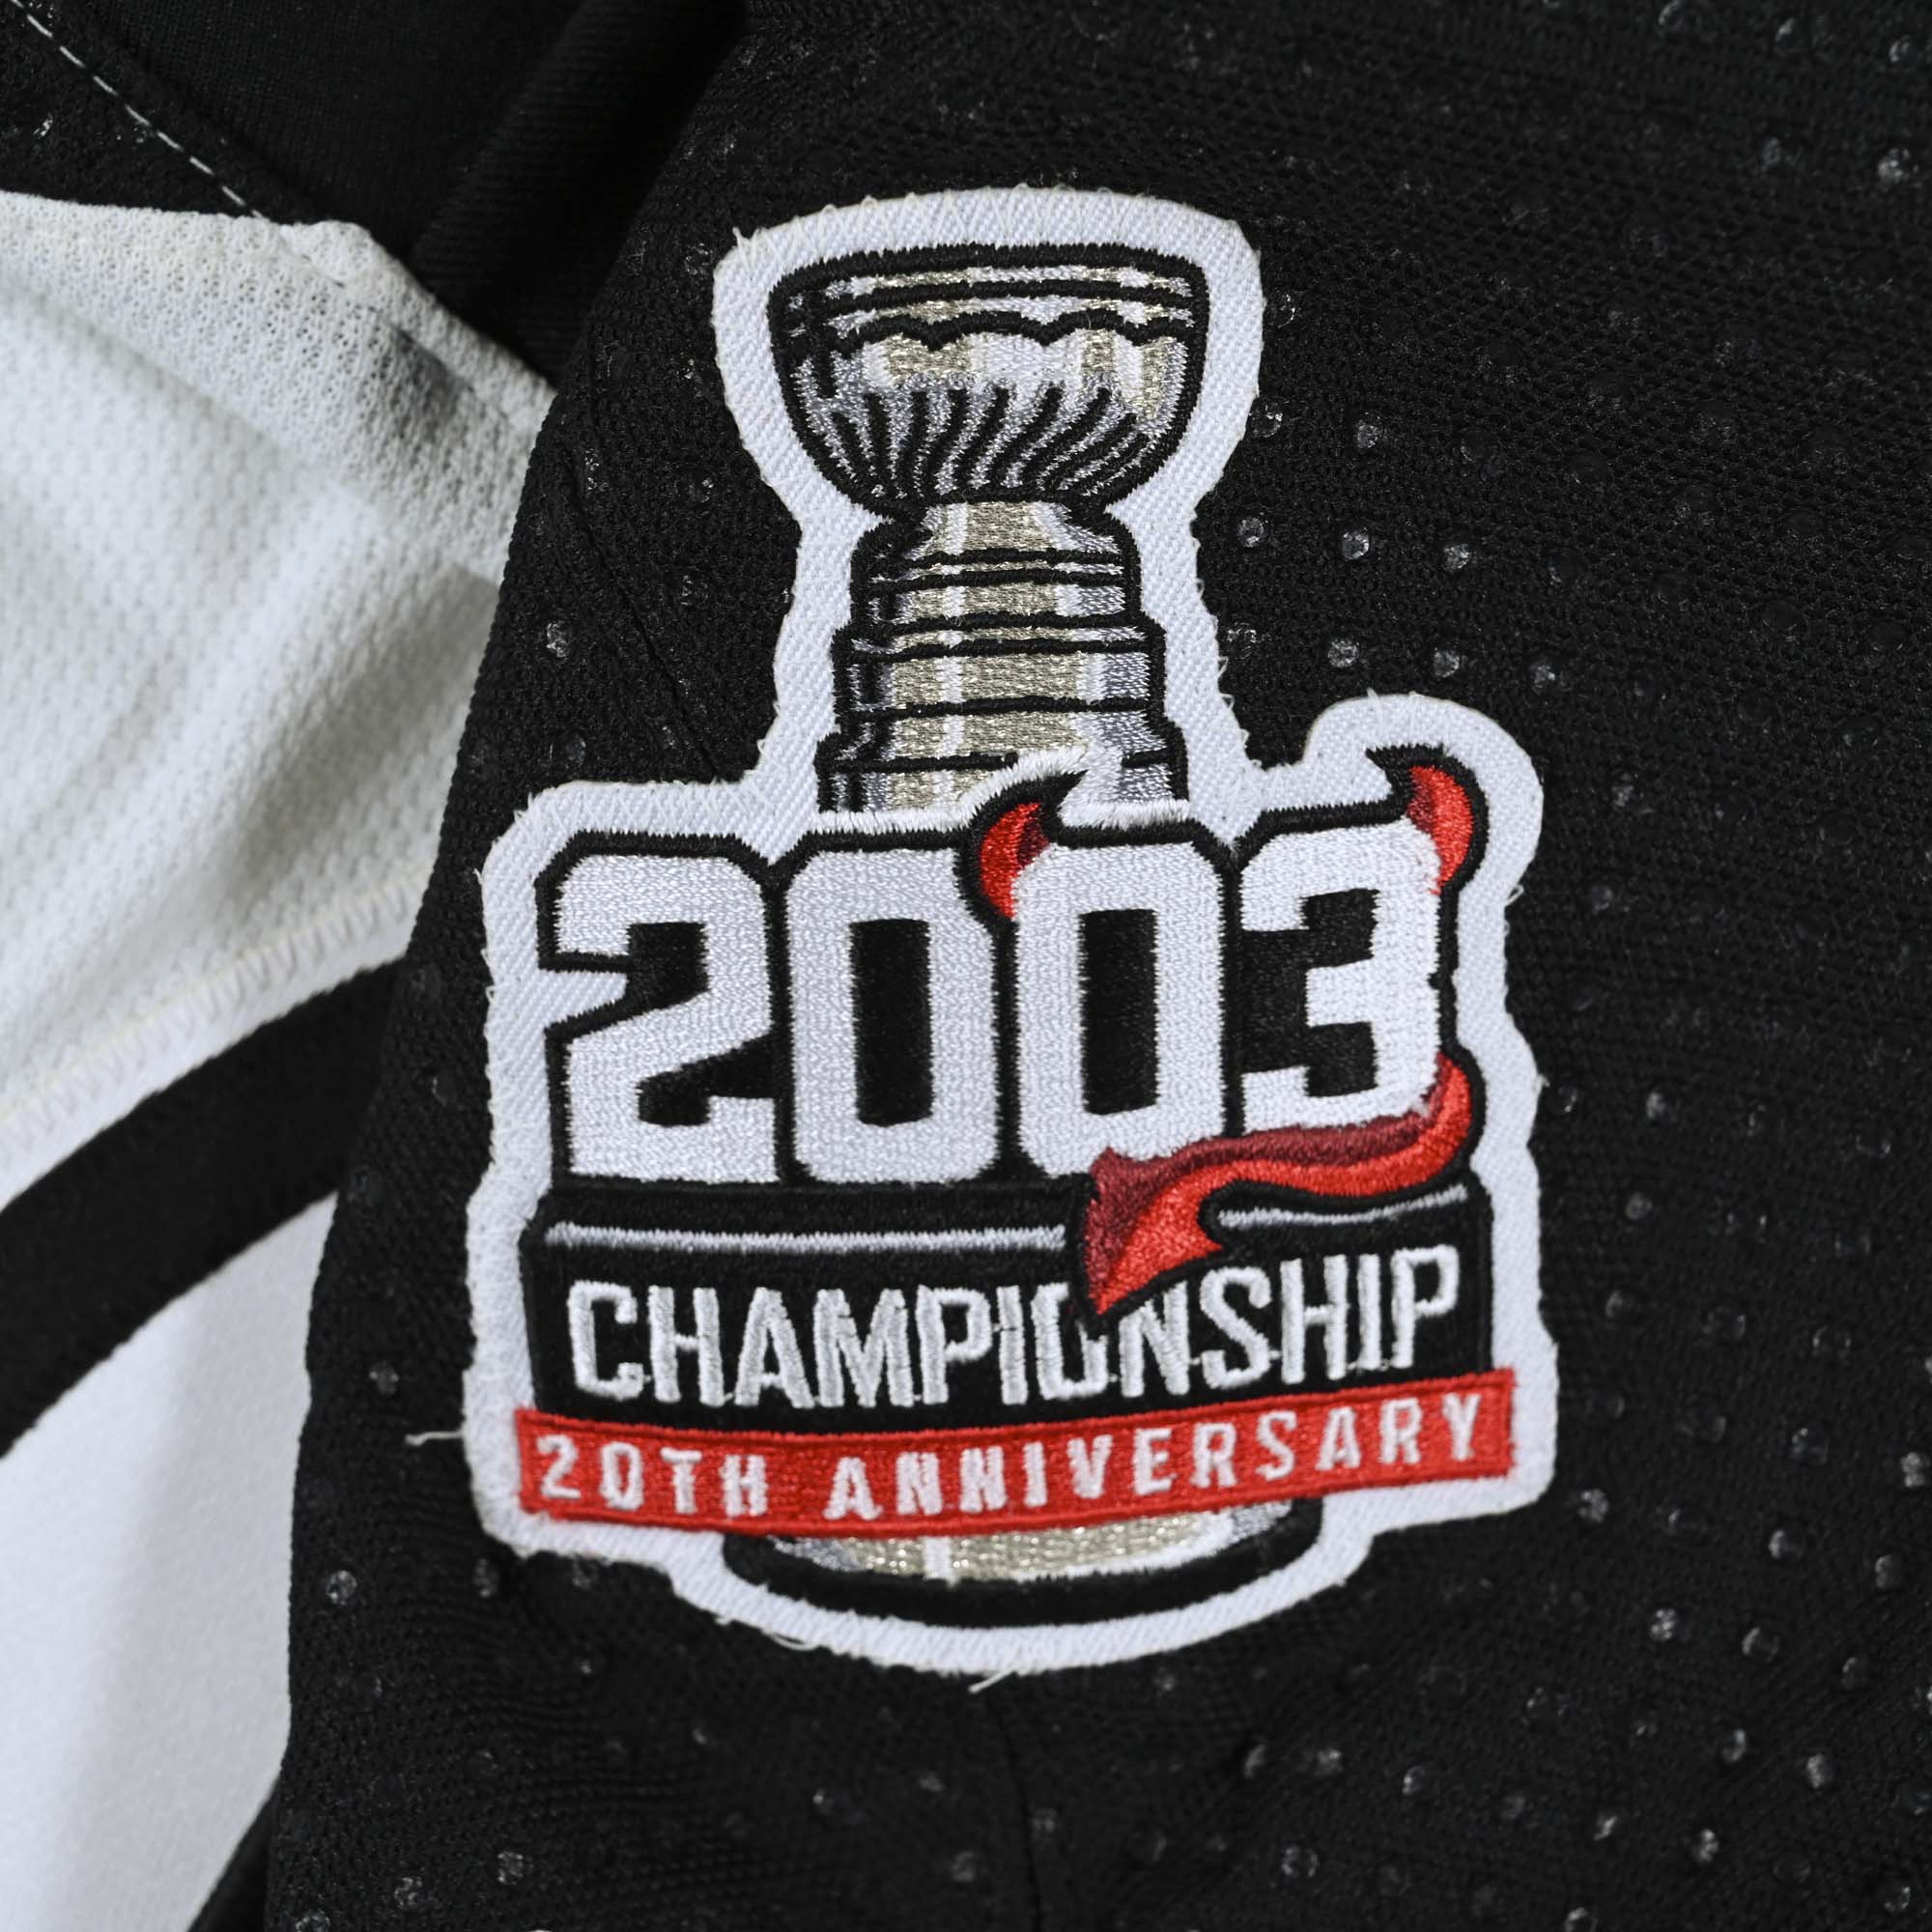 Devils to celebrate 20th anniversary of 2003 Stanley Cup win this